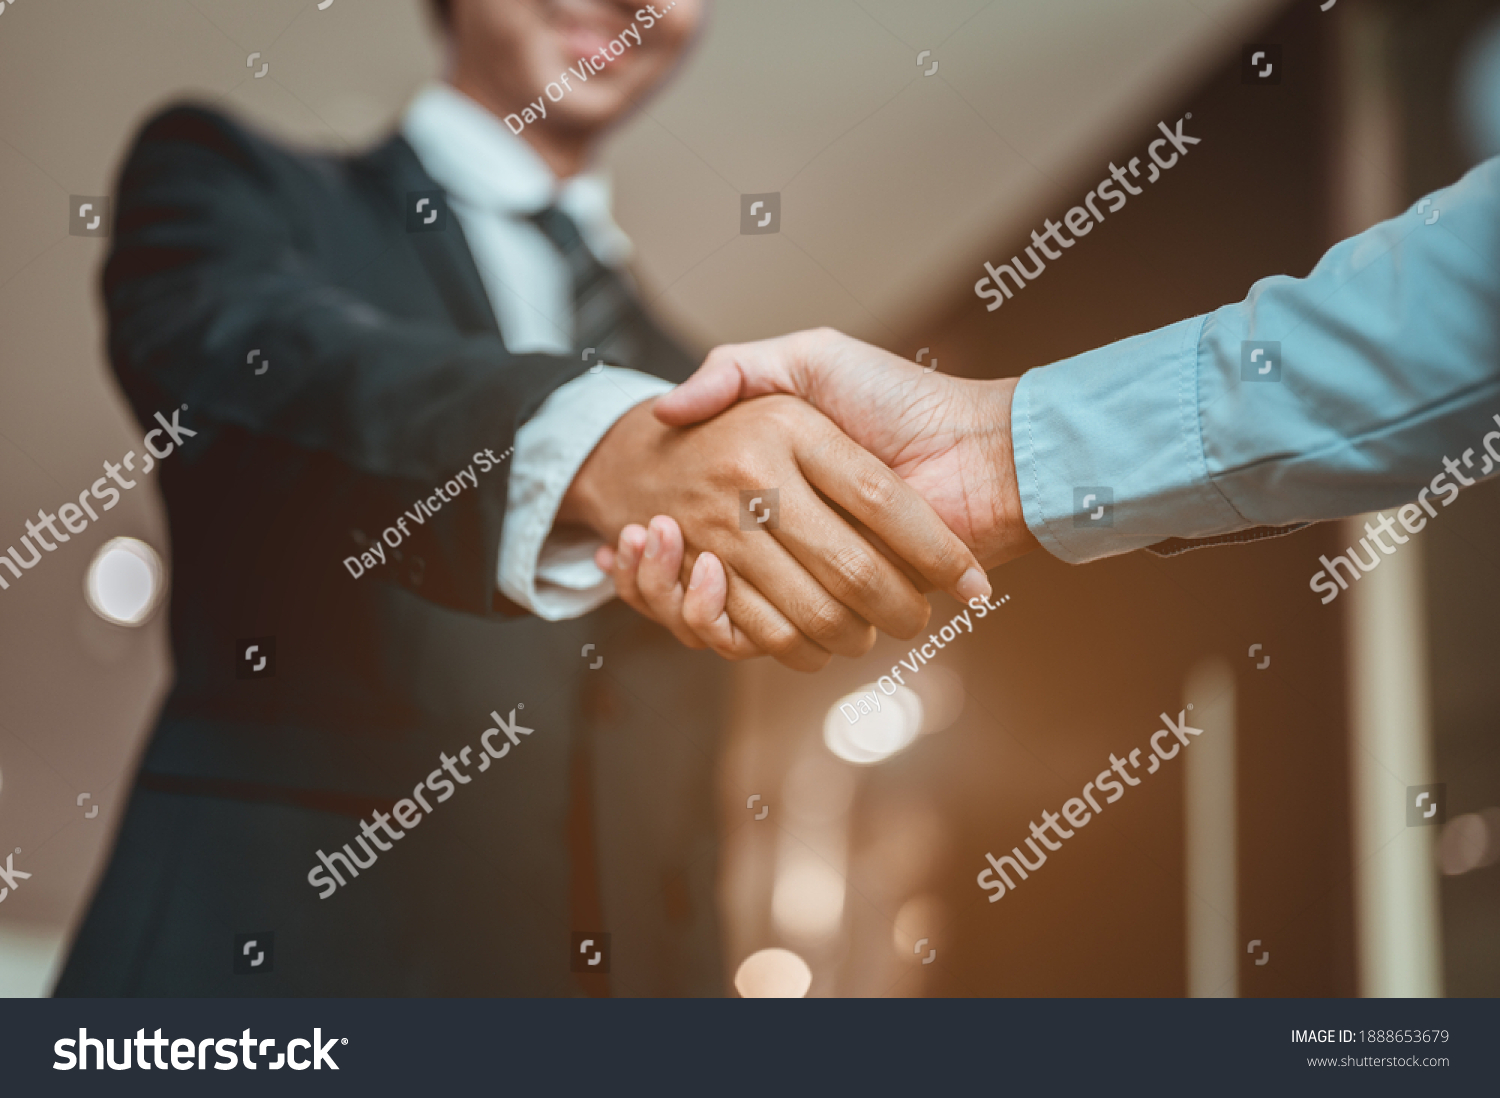 Businessman shake hands and get to know each other before they start talking about business.Bussiness,working, success concept  #1888653679